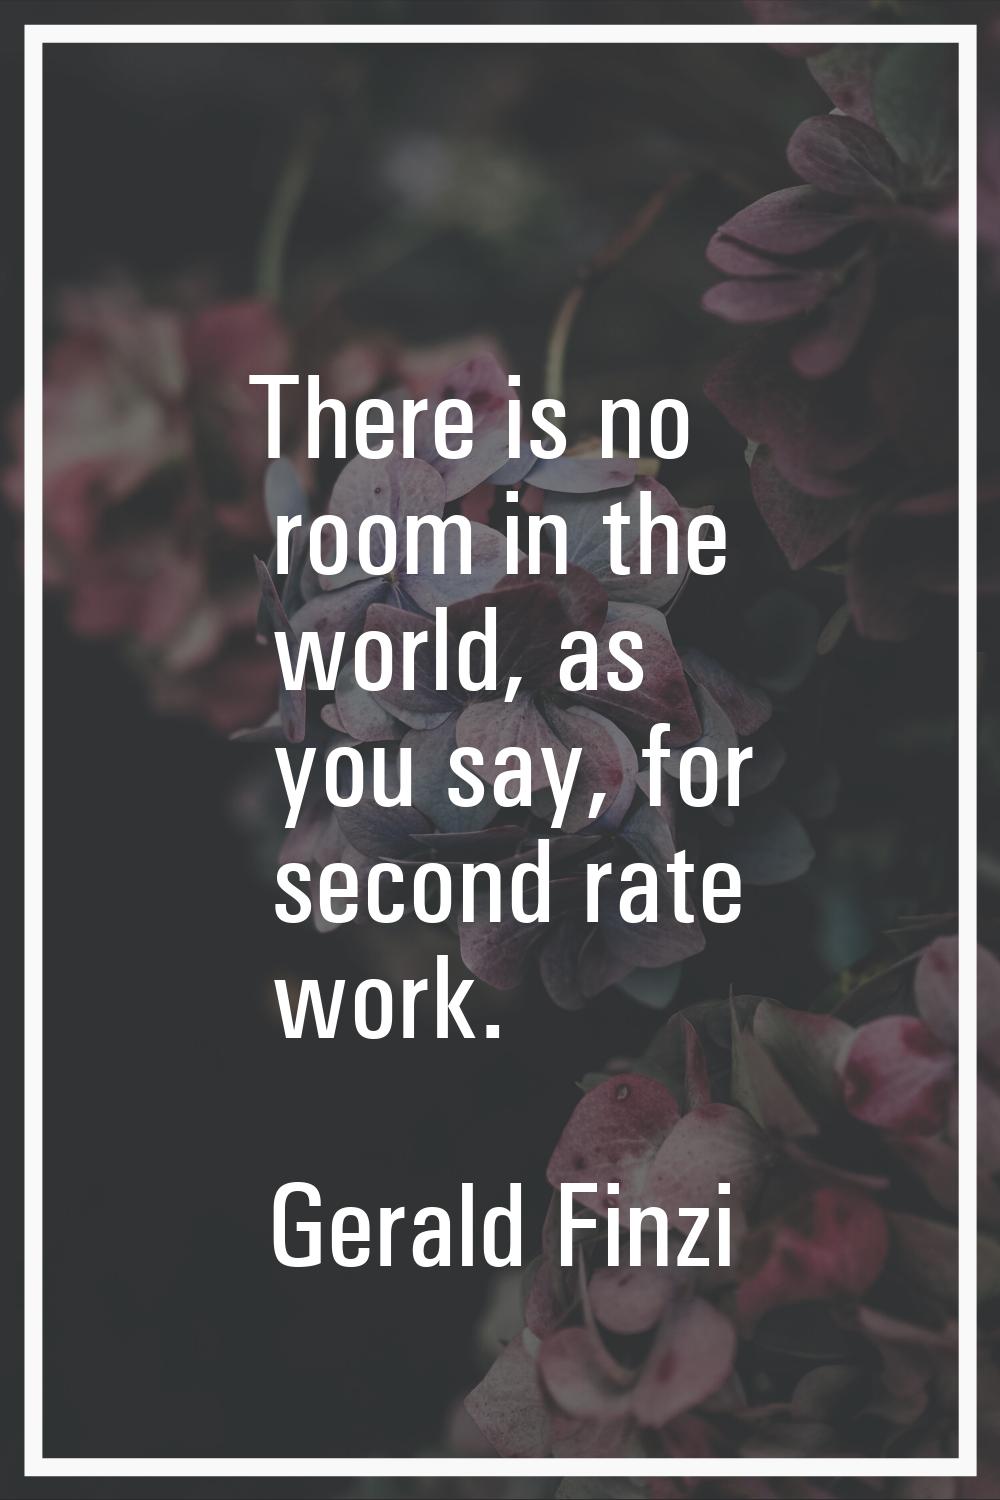 There is no room in the world, as you say, for second rate work.